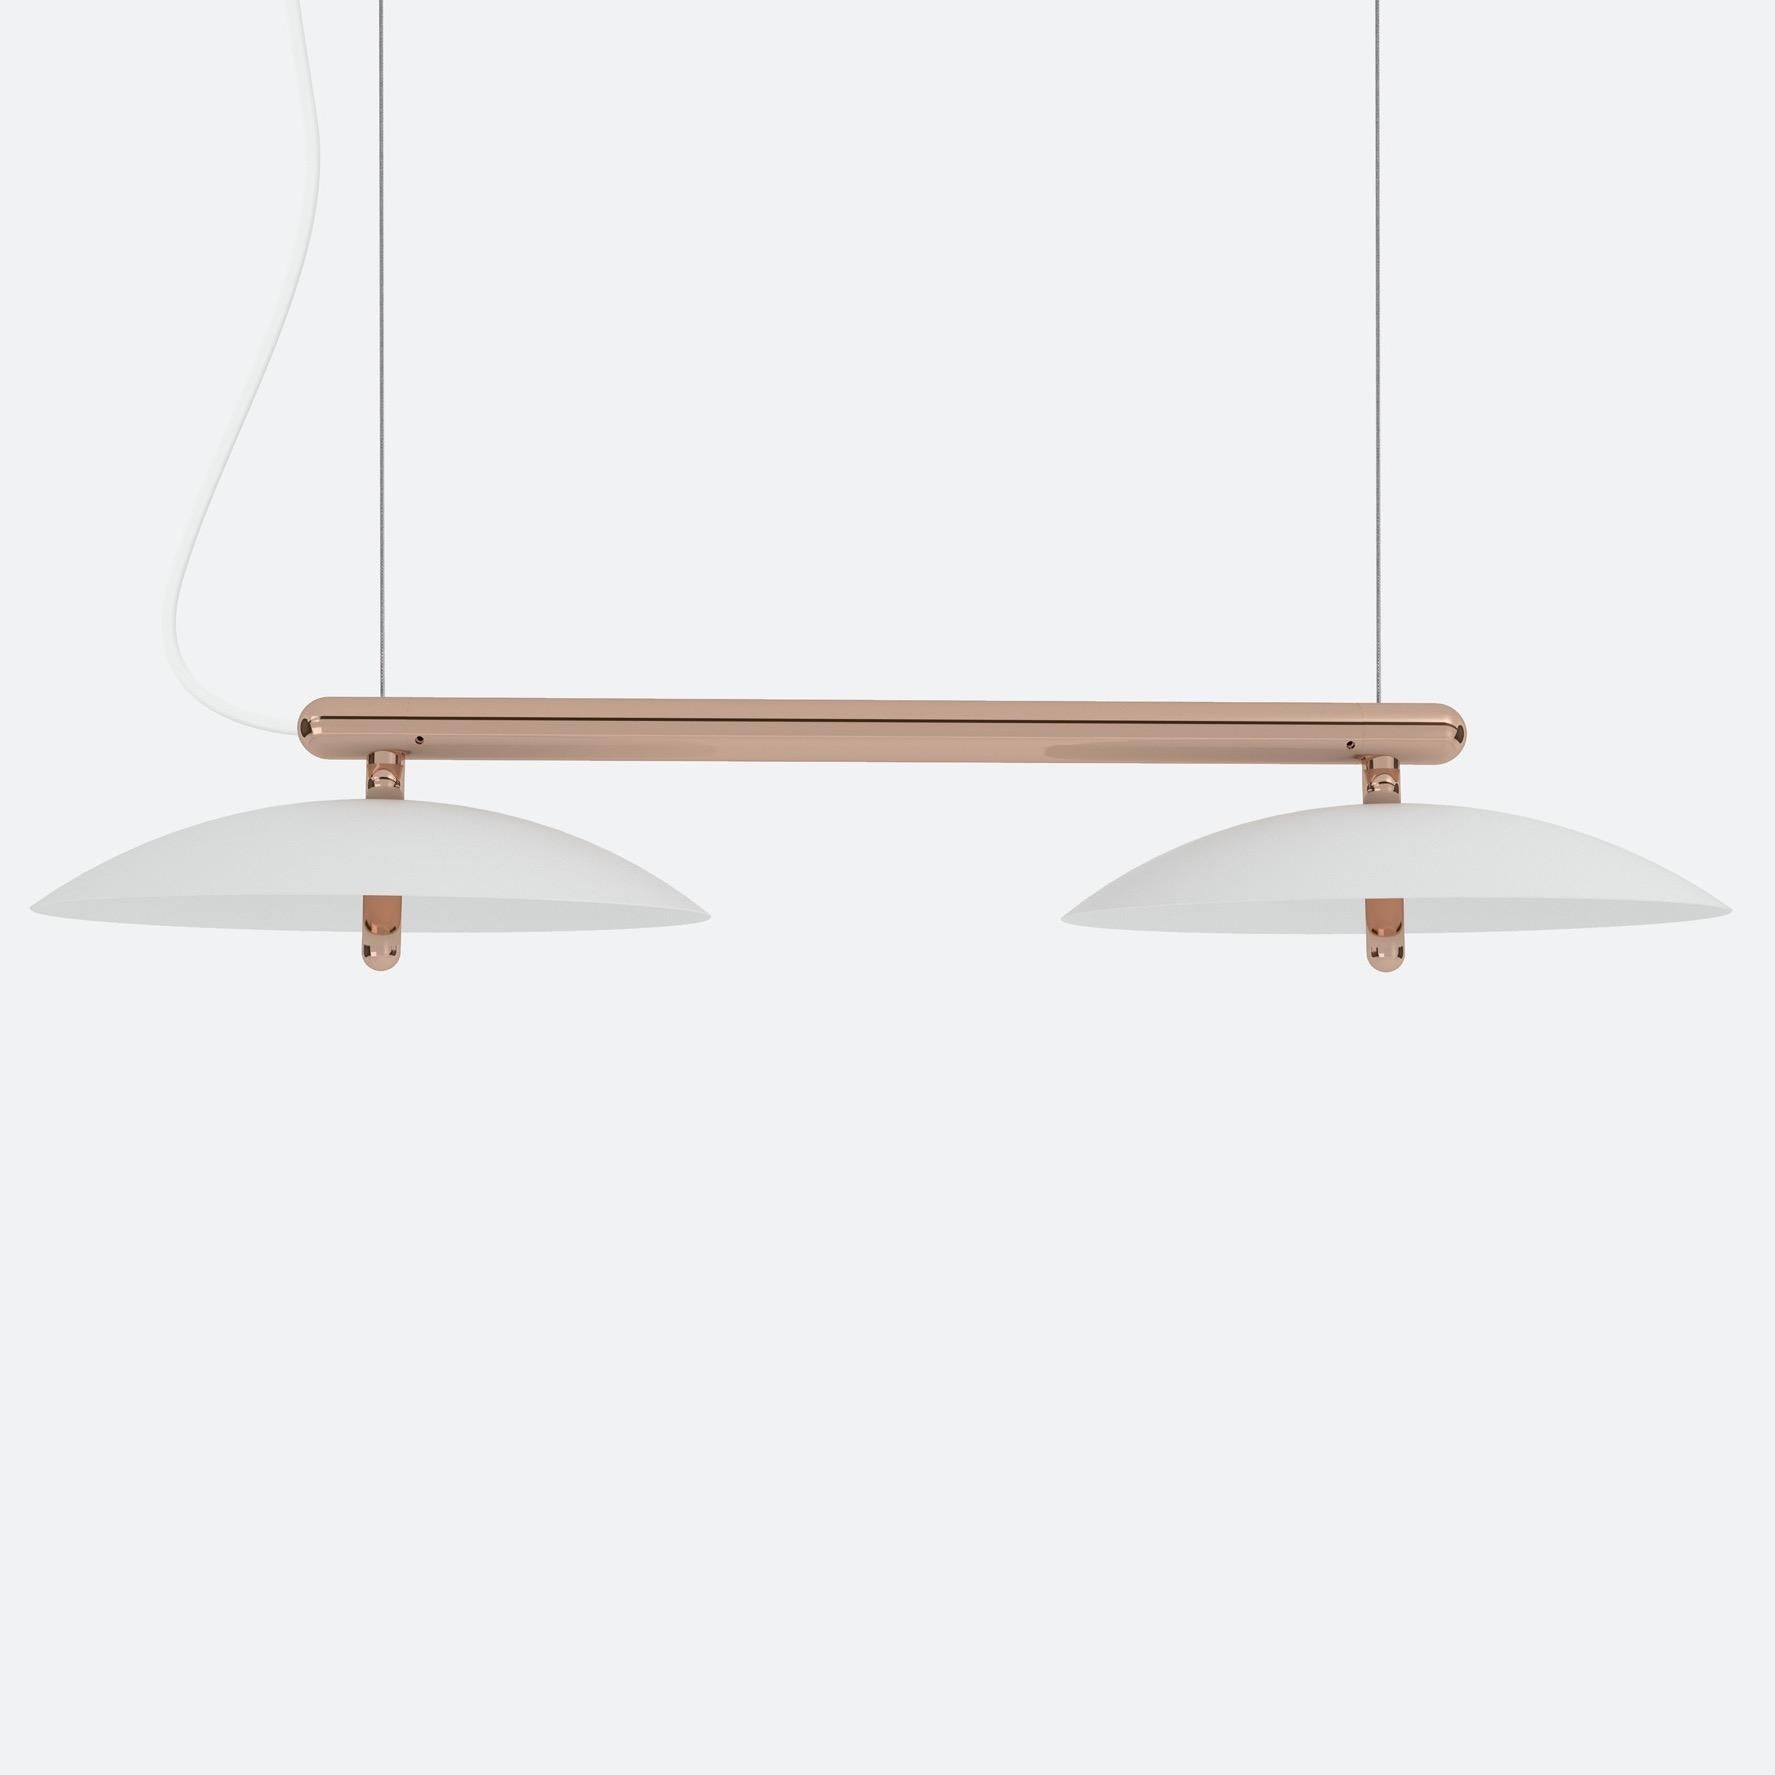 Price is for a signal linear pendant with white shade and copper accents. This piece is customizable so we can also make the finishes per order to your spec. 

Lamping: G8 LED Bulbs (included)
Canopy: White, 5in Diameter, .25in height
4x G8 LED